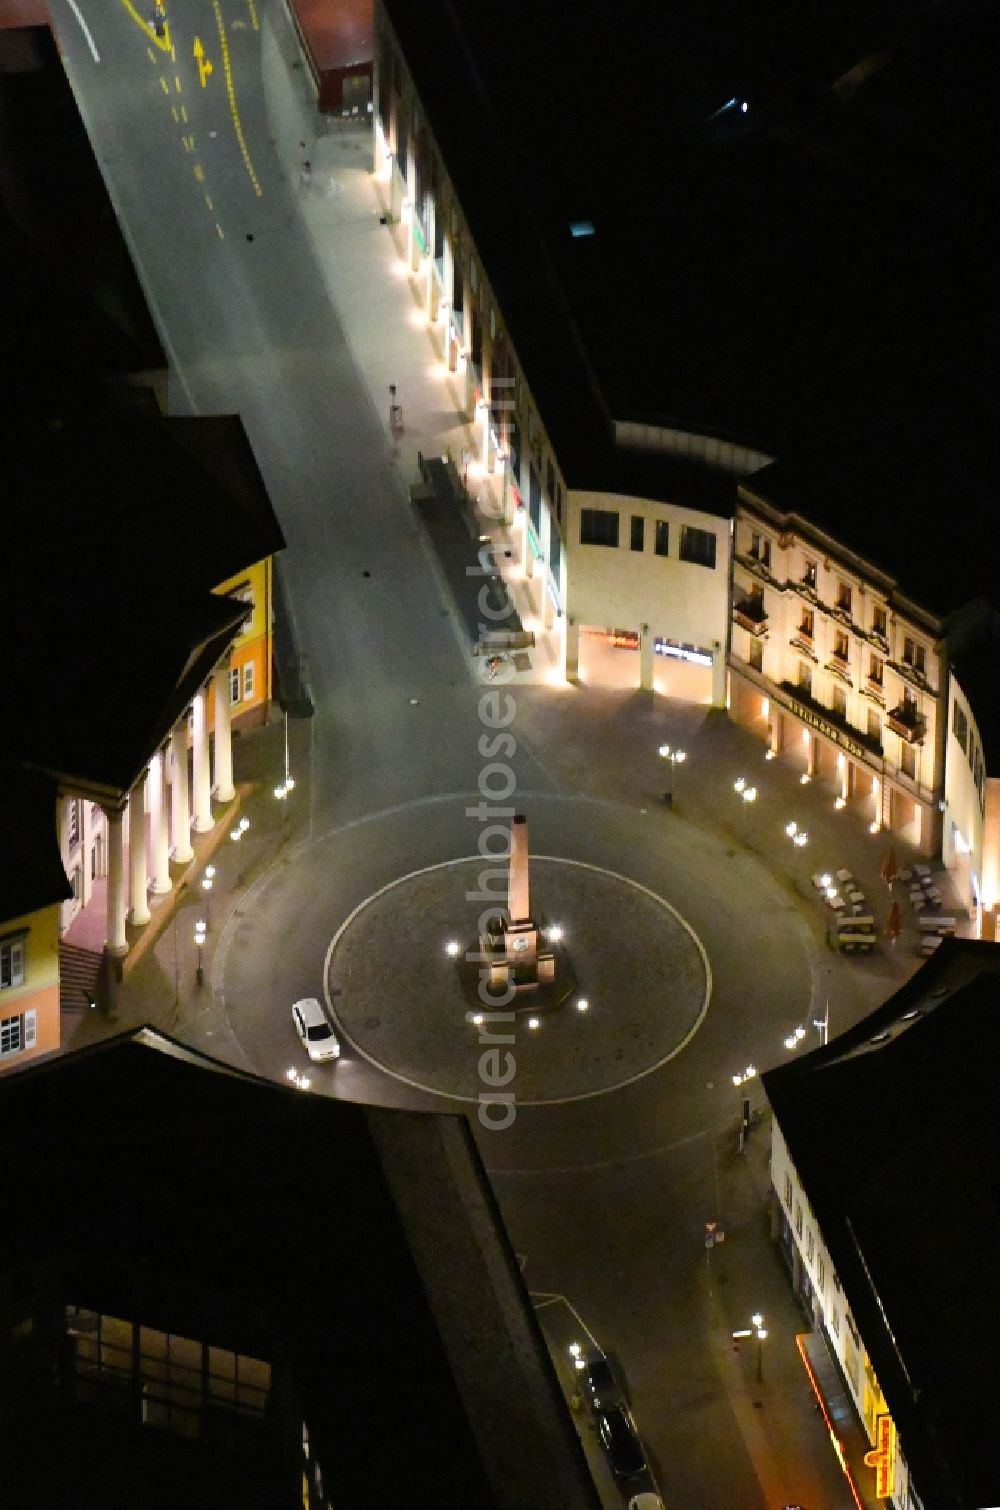 Karlsruhe at night from above - Night lighting circular surface - Place Rondellplatz on shopping mall Ettliner Tor in Karlsruhe in the state Baden-Wurttemberg, Germany